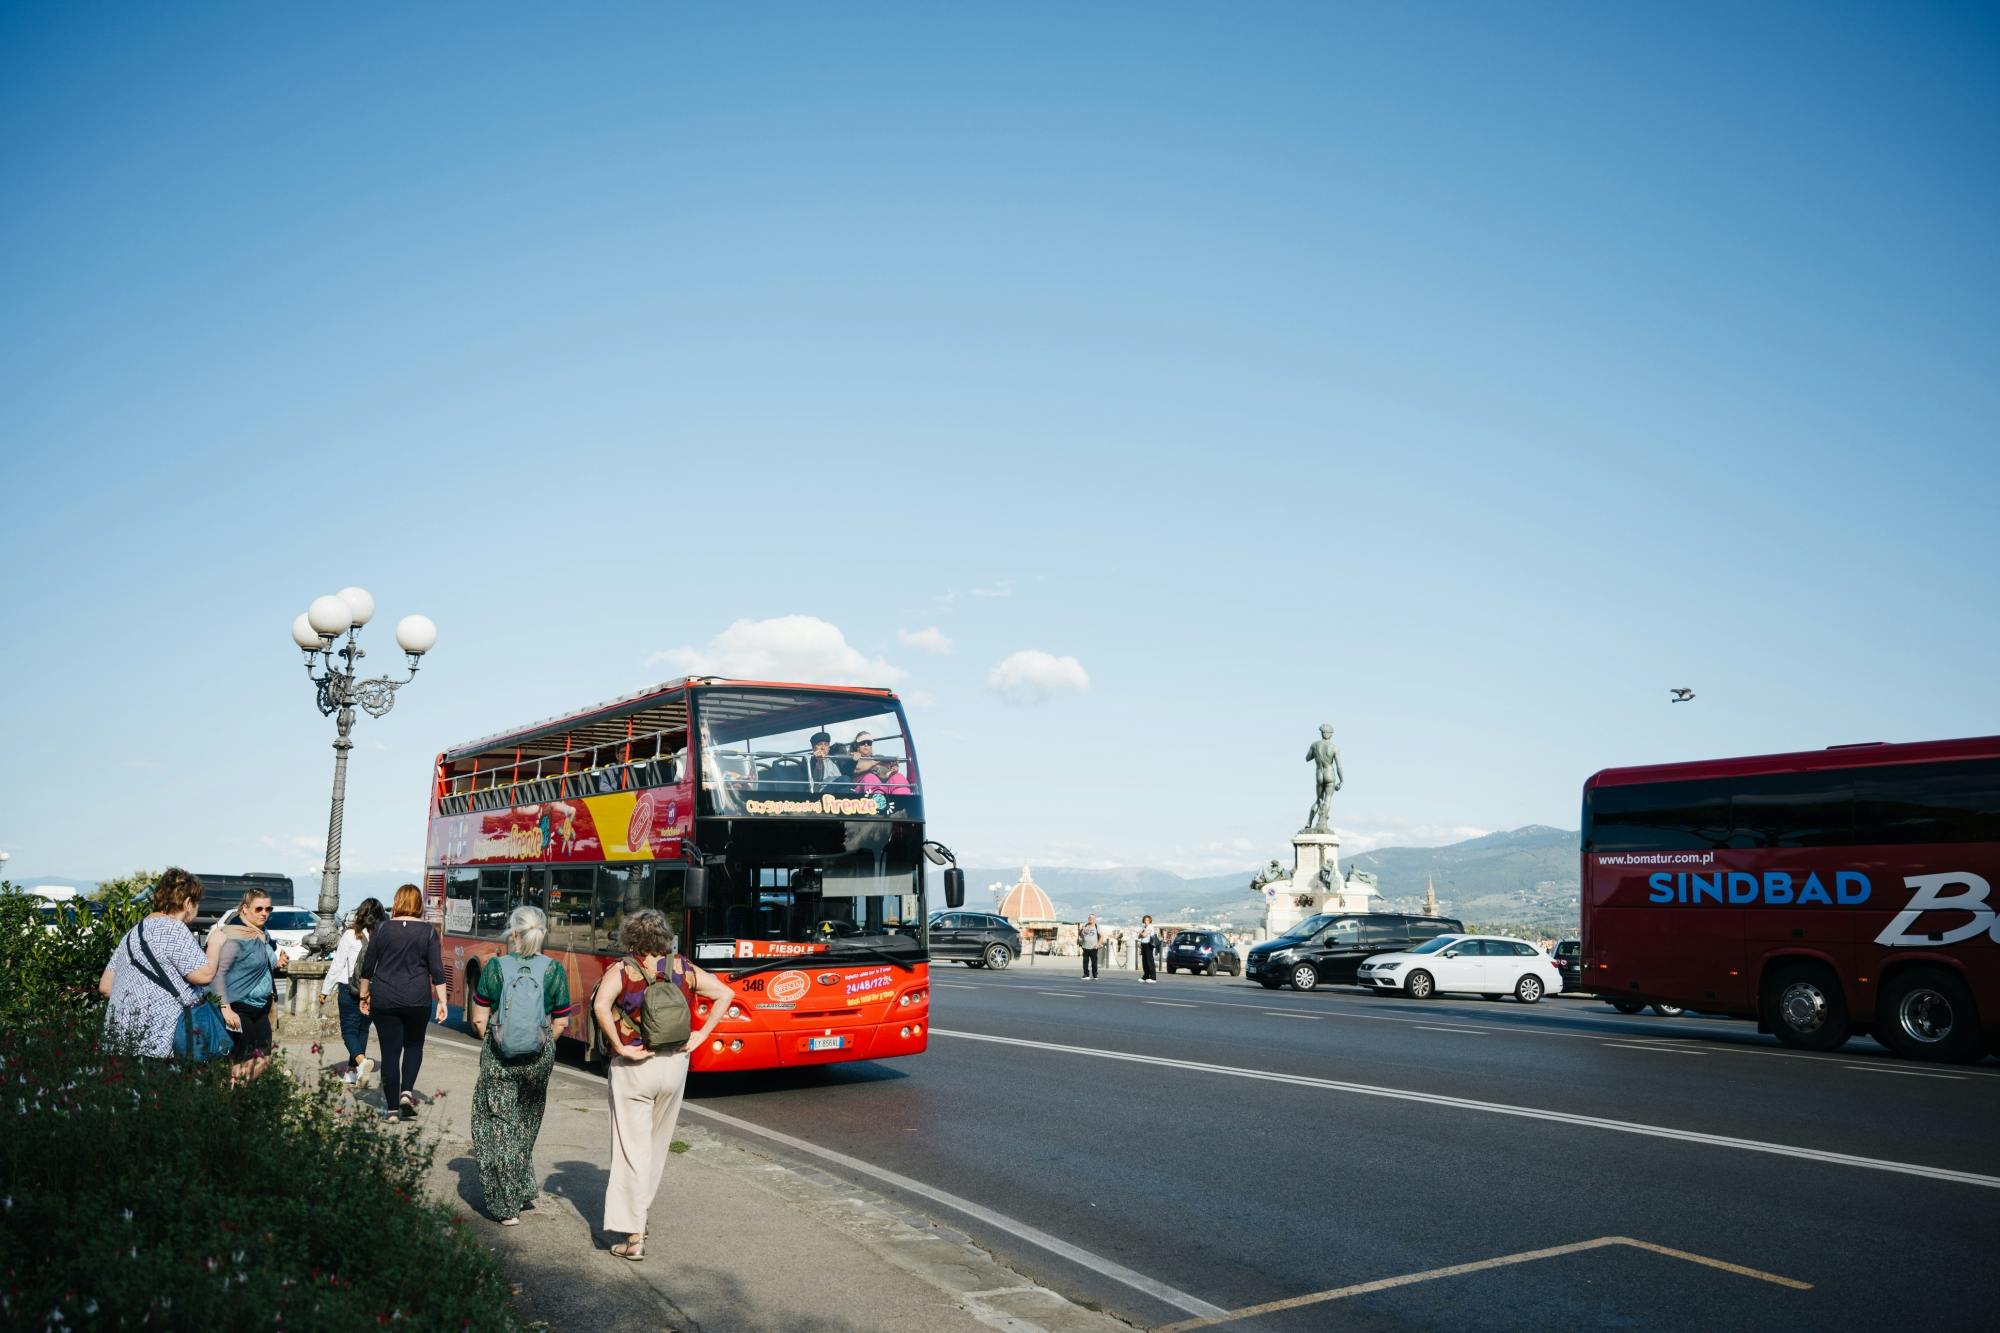 City Sightseeing Florence Hop-On Hop-Off with Transfer from La Spezia